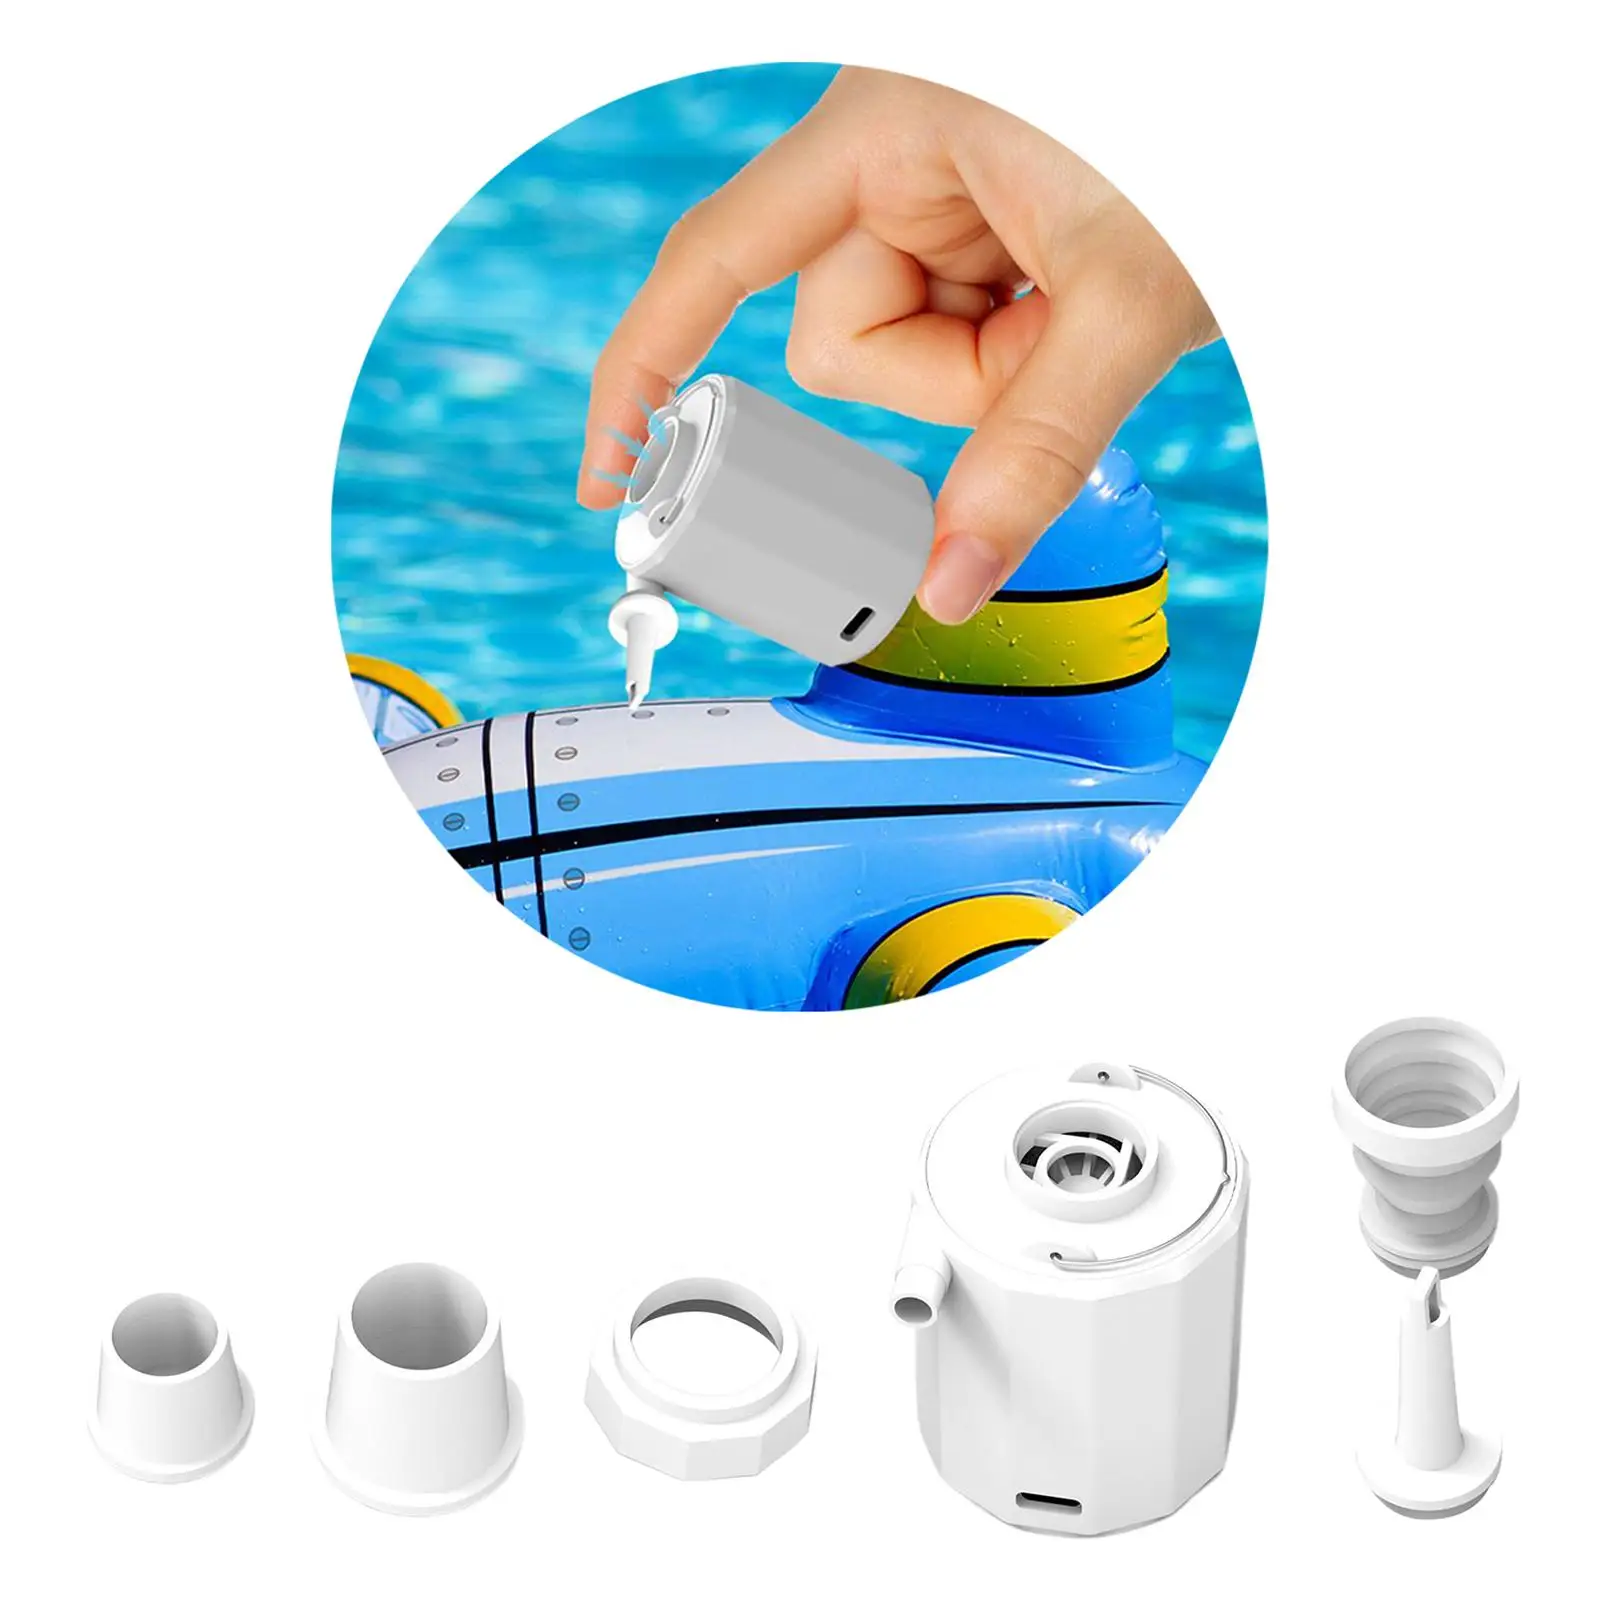 Tiny Air Pump, 4 in 1 Inflatable Pump for Vacuum Storage Bags Pool Toy Pool Floats Inflation Device Accessories Outdoor Camping